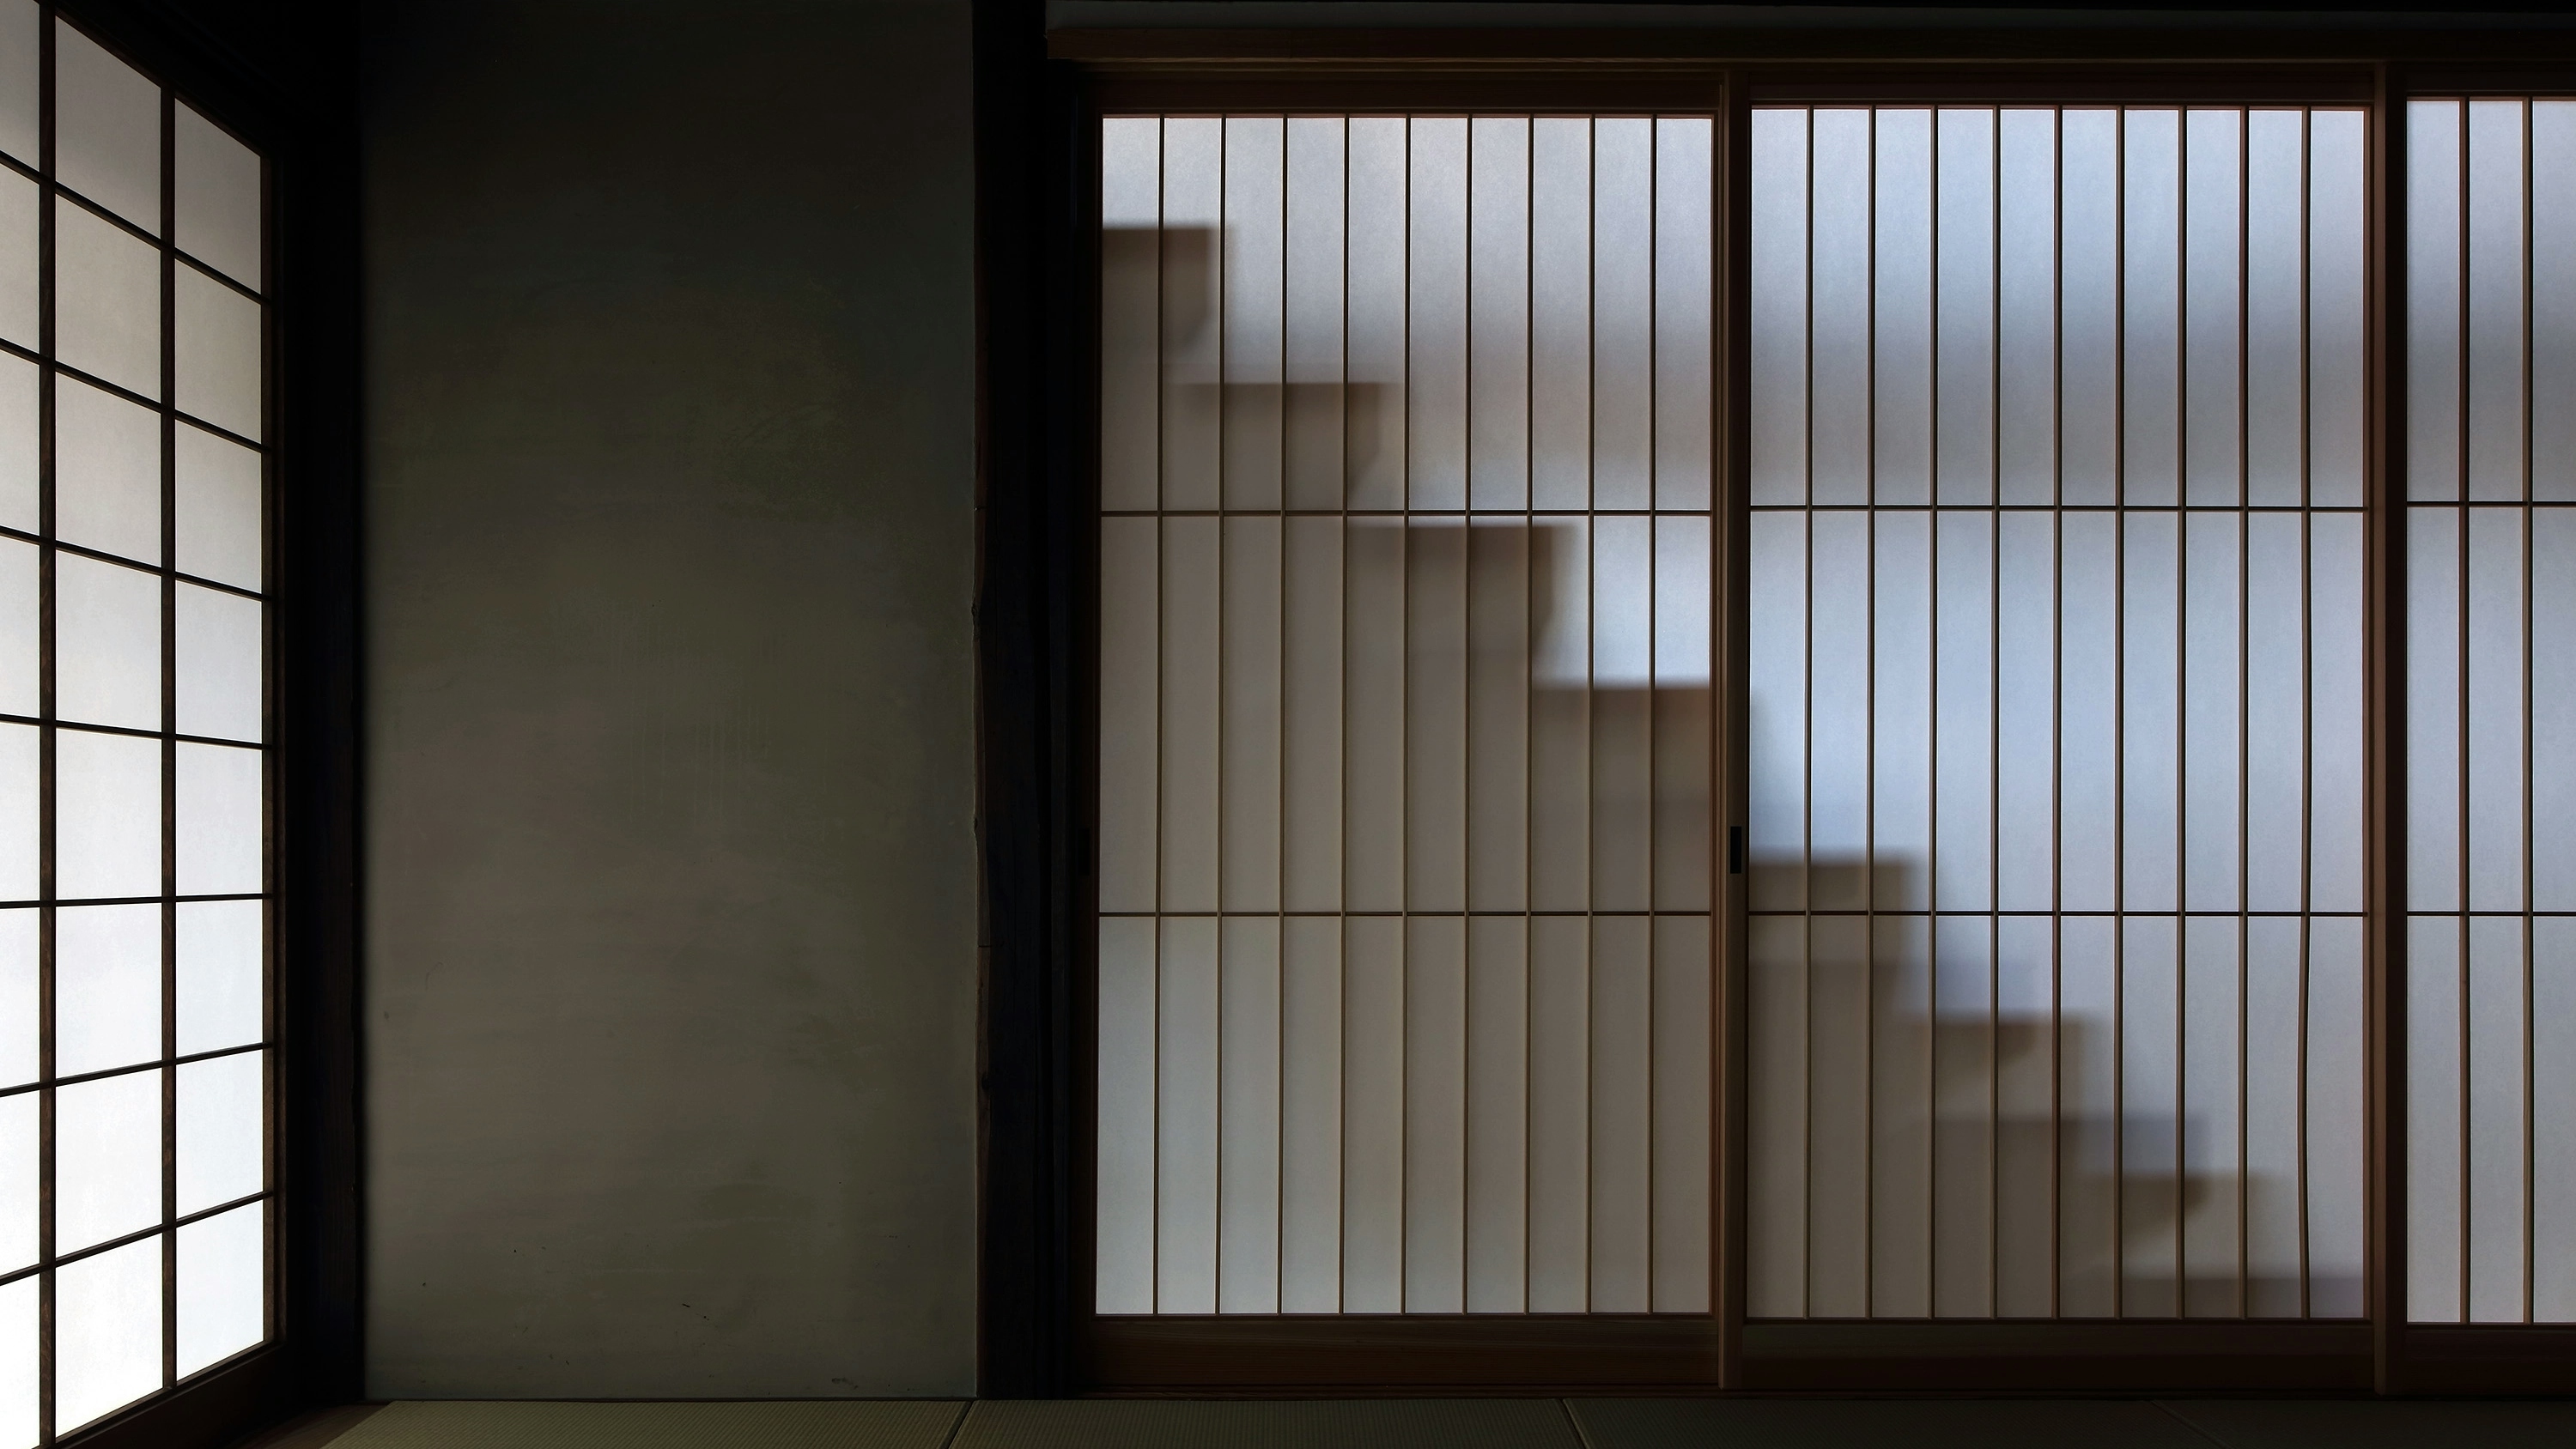 A shadow of a staircase is seen behind translucent shoji (Japanese paper screened) walls